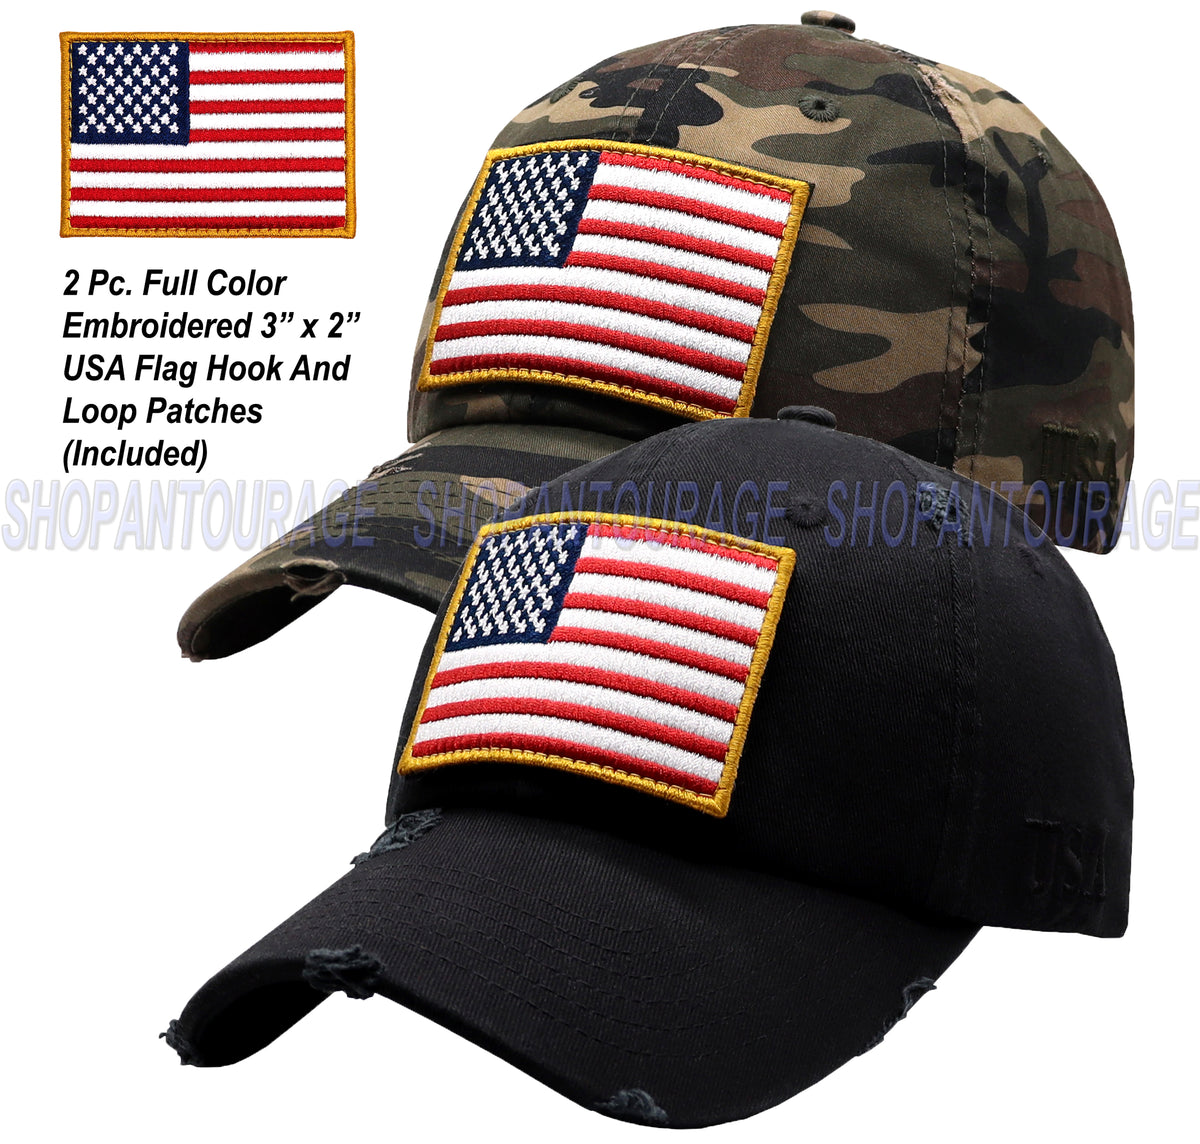 ANTOURAGE 2 PACK: American Flag Hat for Men And Women